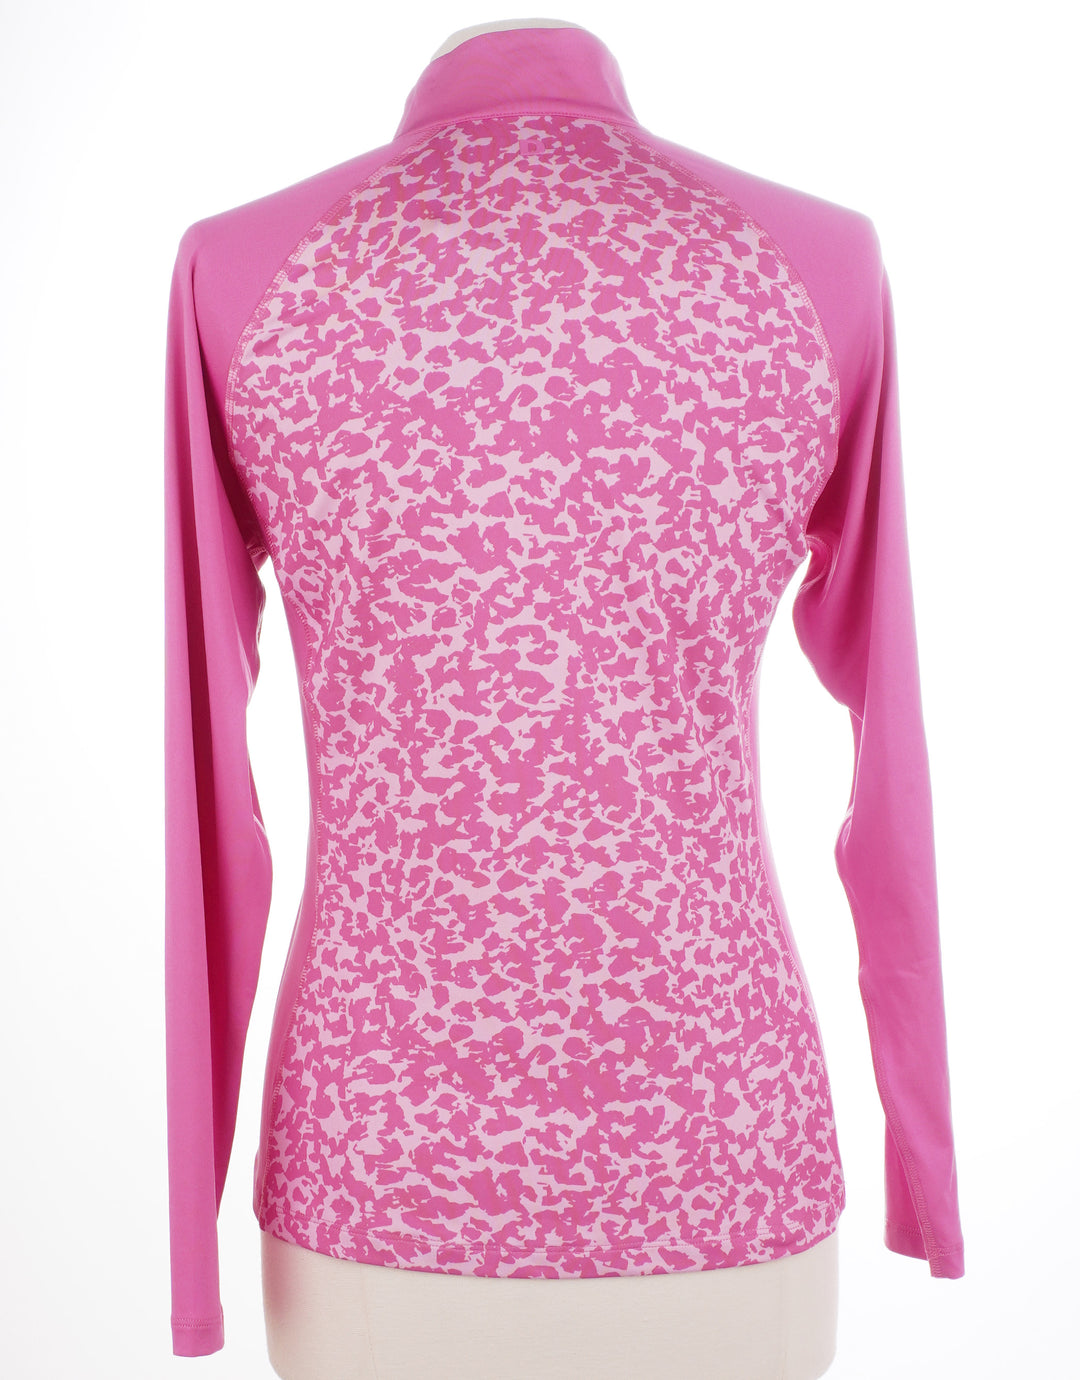 Dunning Golf Ayla Jersey Performance Long Sleeve - Lily- Size Small - Skorzie